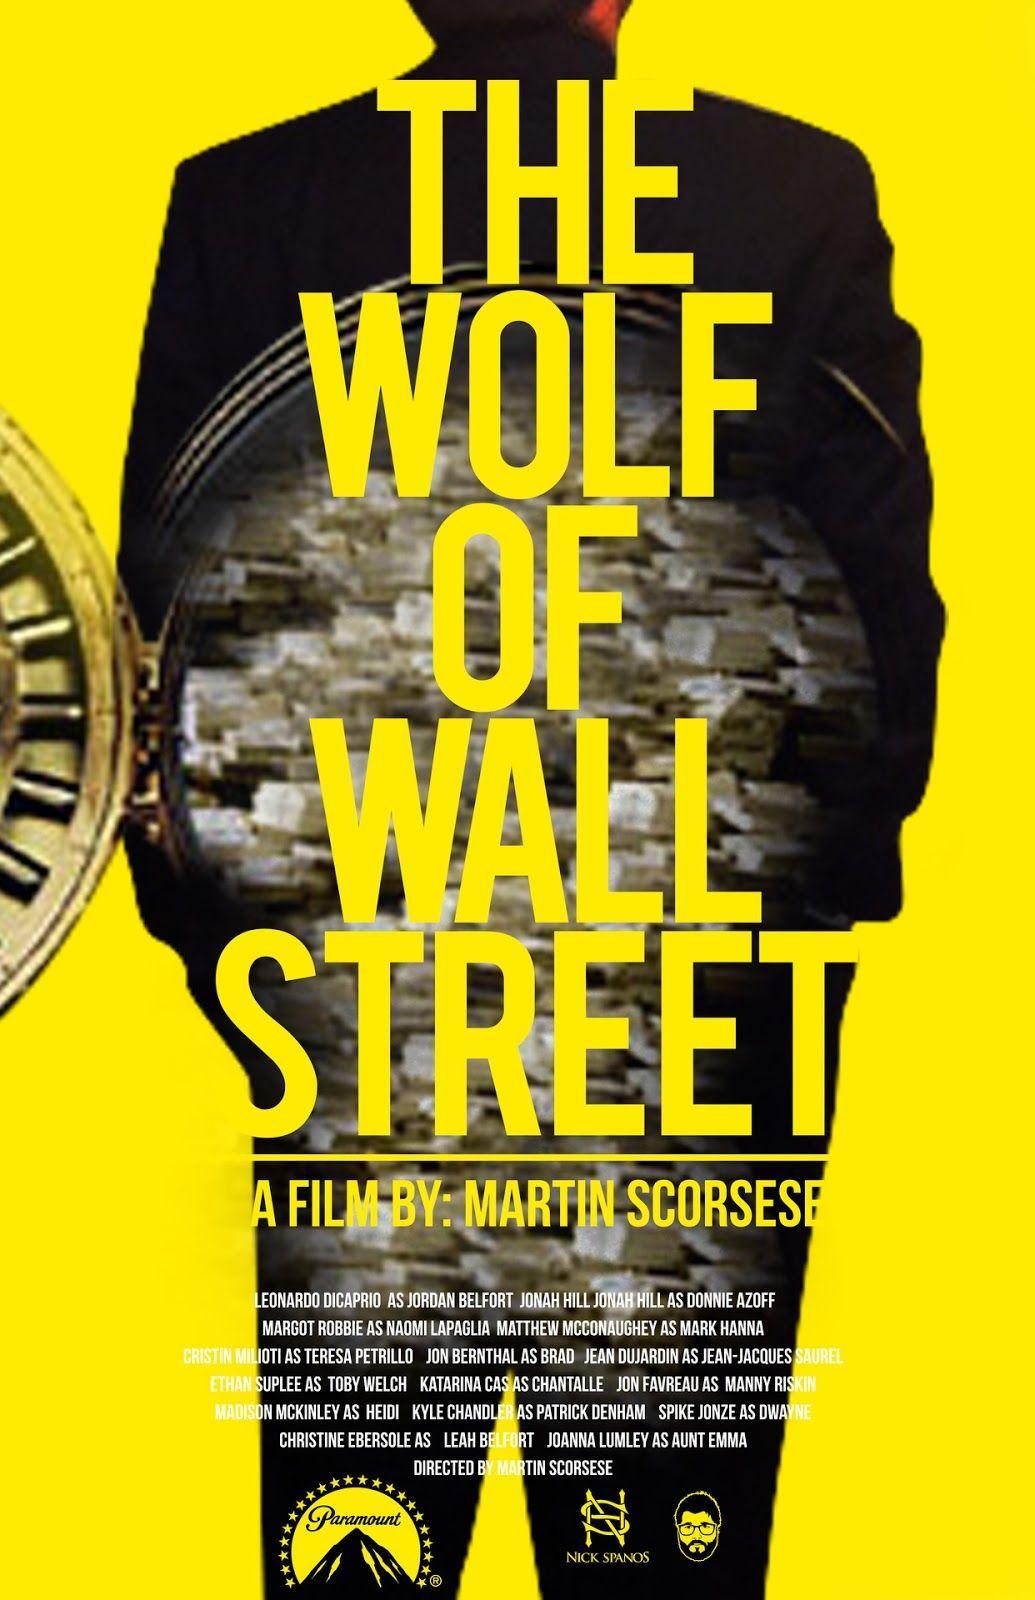 The Wolf of Wall Street: Controversy and Box Office success